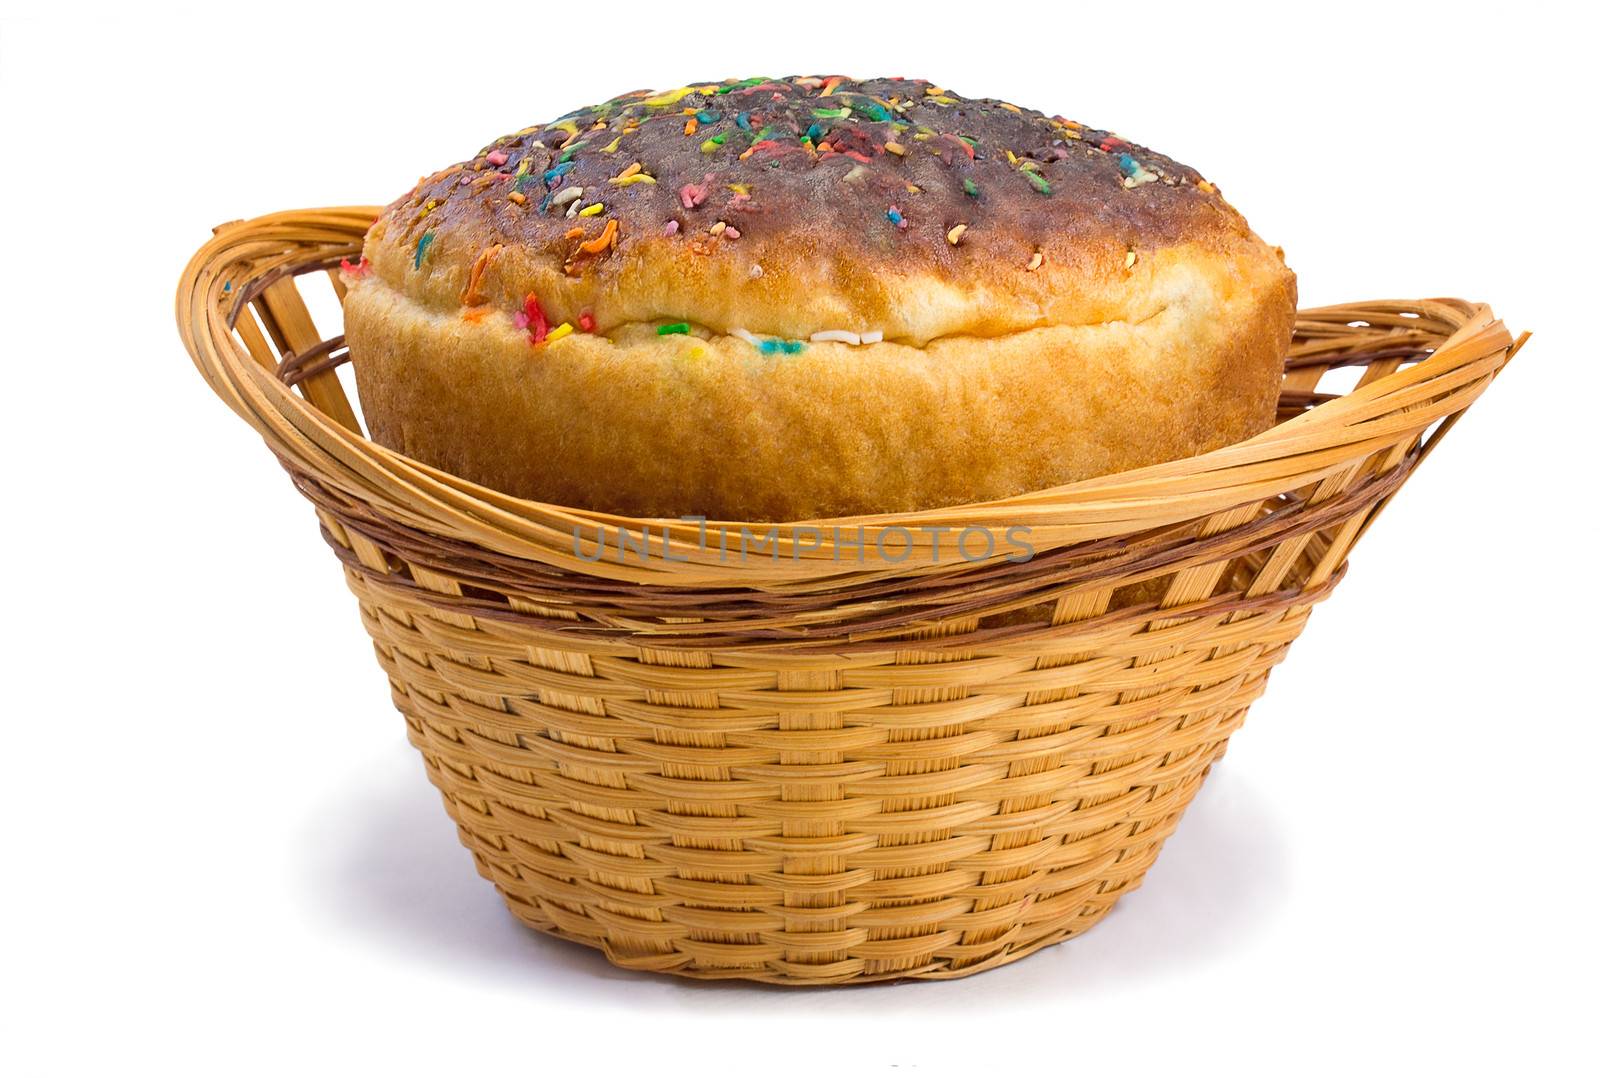 Beautifully decorated Easter bread in a wicker basket. Presented on a white background.